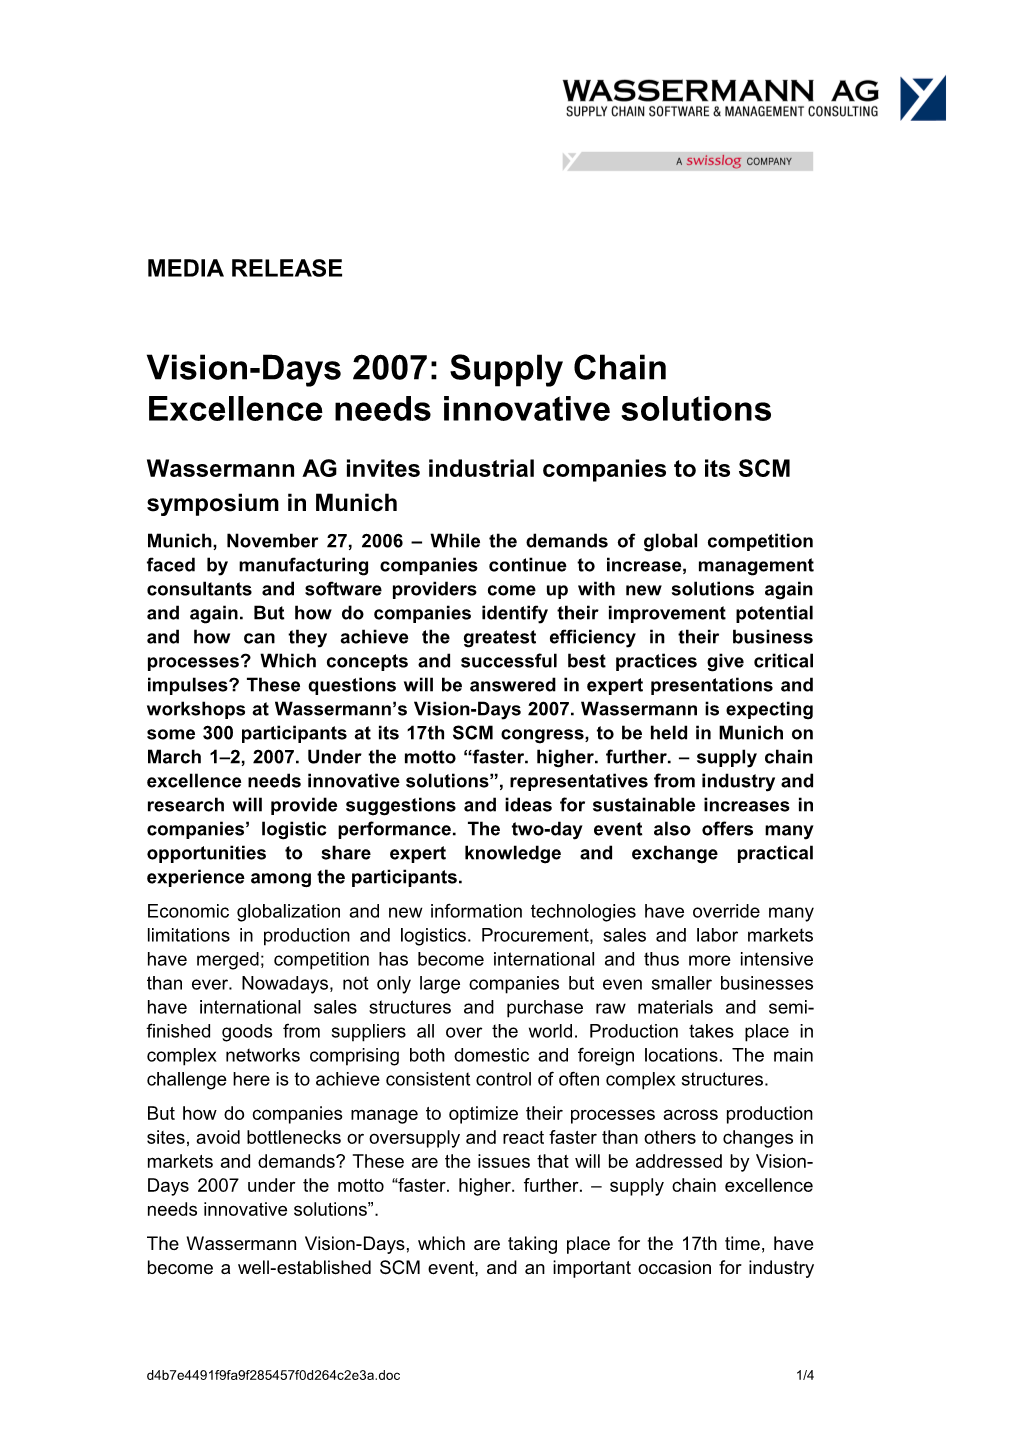 Vision-Days 2007: Supply Chain Excellence Needs Innovative Solutions